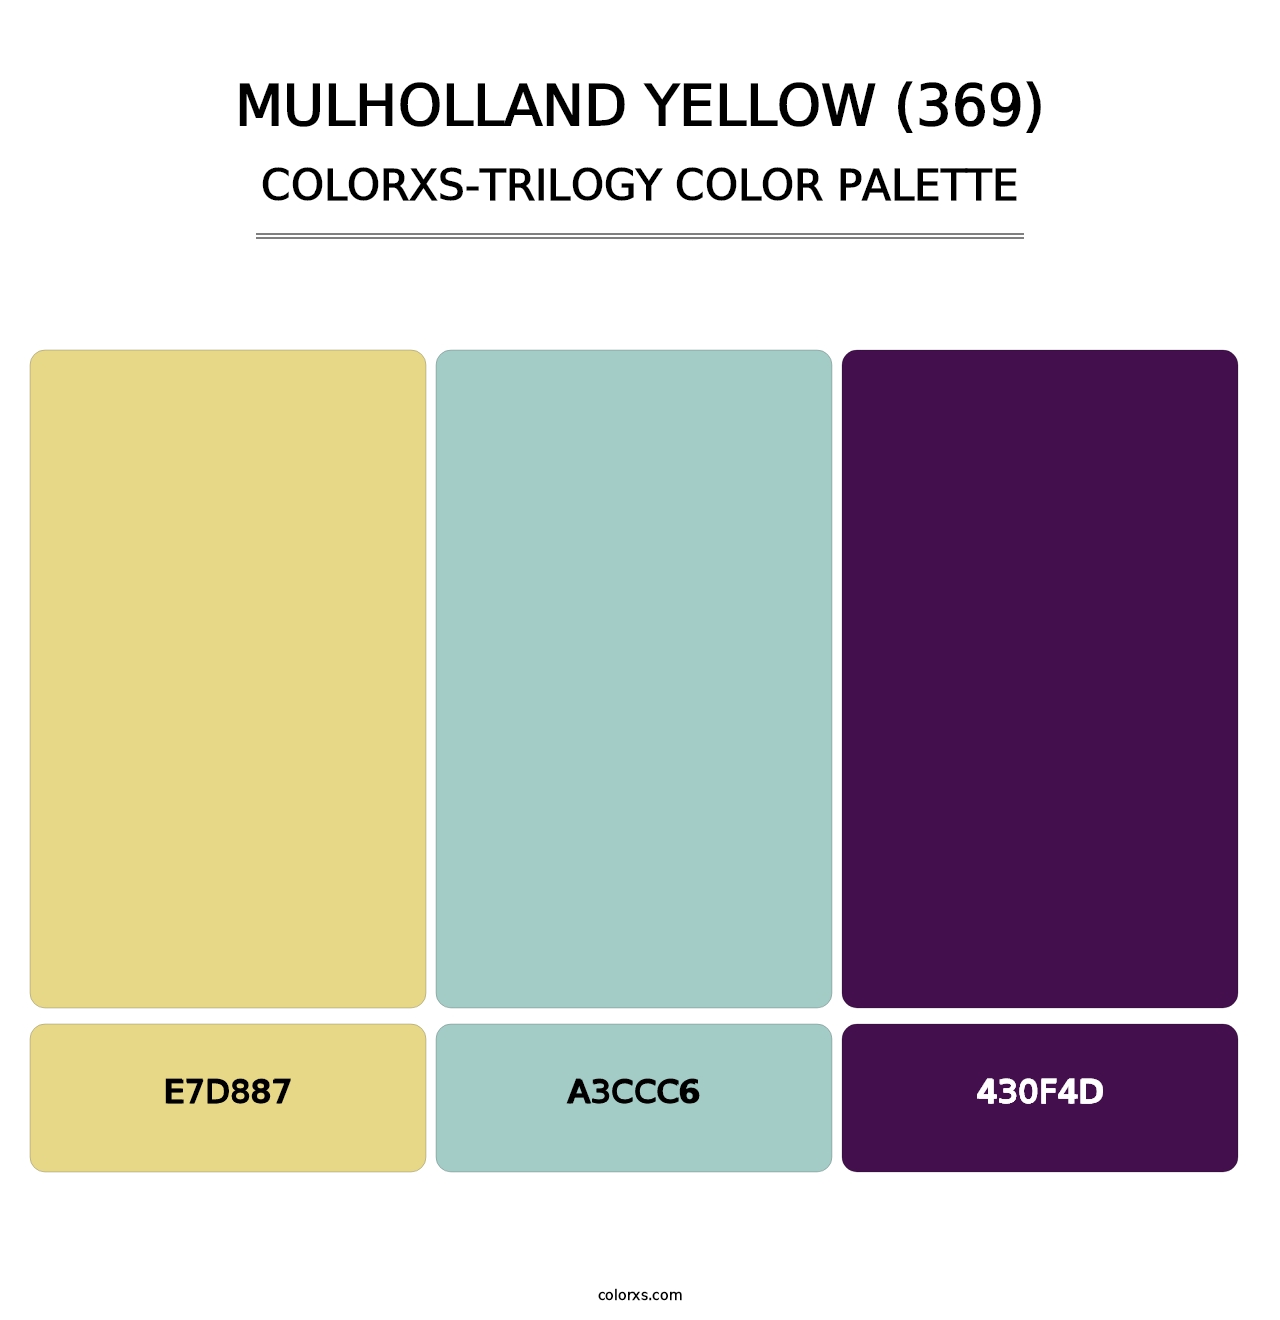 Mulholland Yellow (369) - Colorxs Trilogy Palette